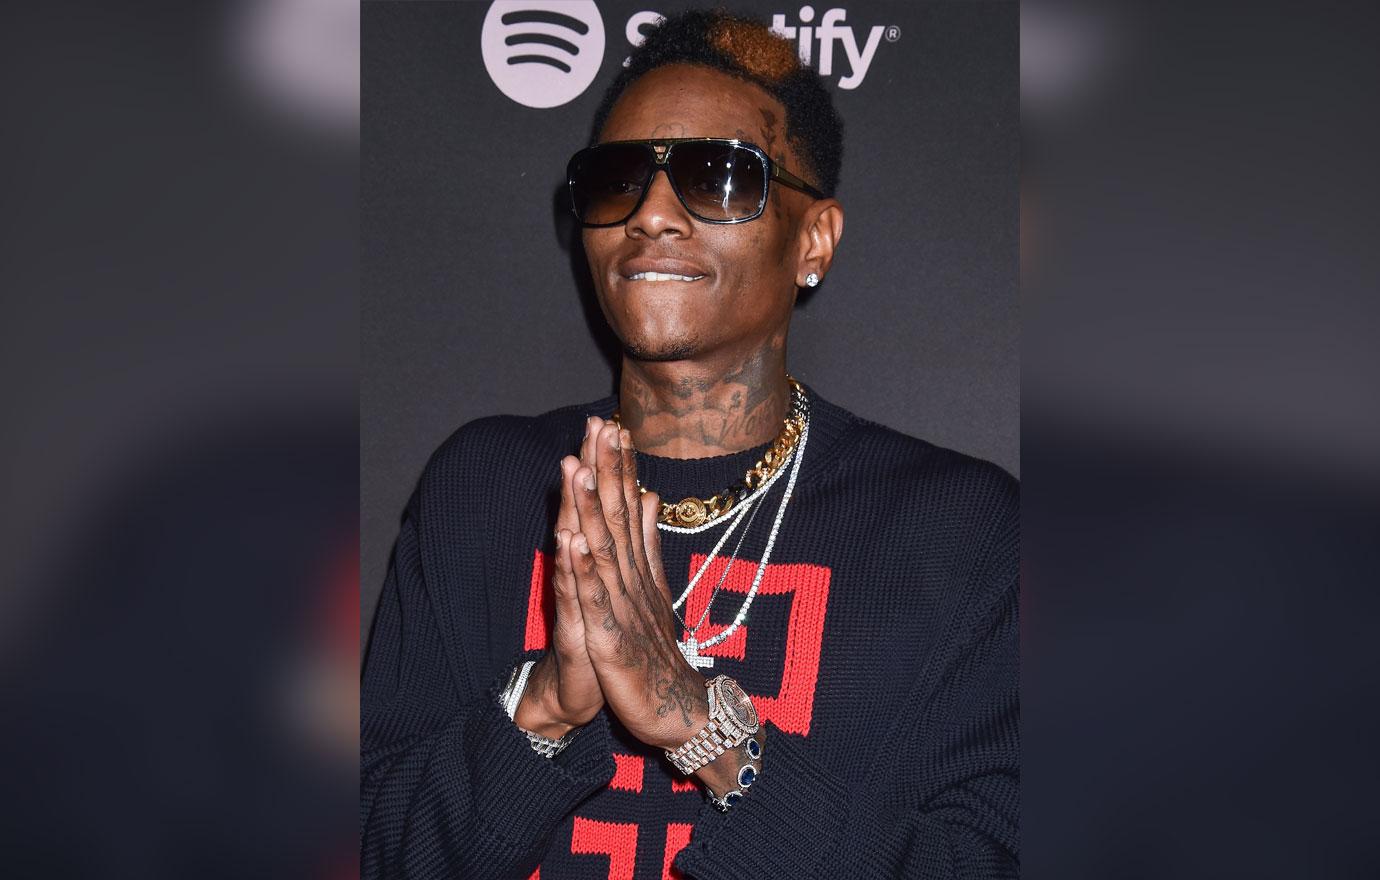 Soulja Boy Sued By Ex Girlfriend Who Claims His Abuse Caused Her To Miscarry